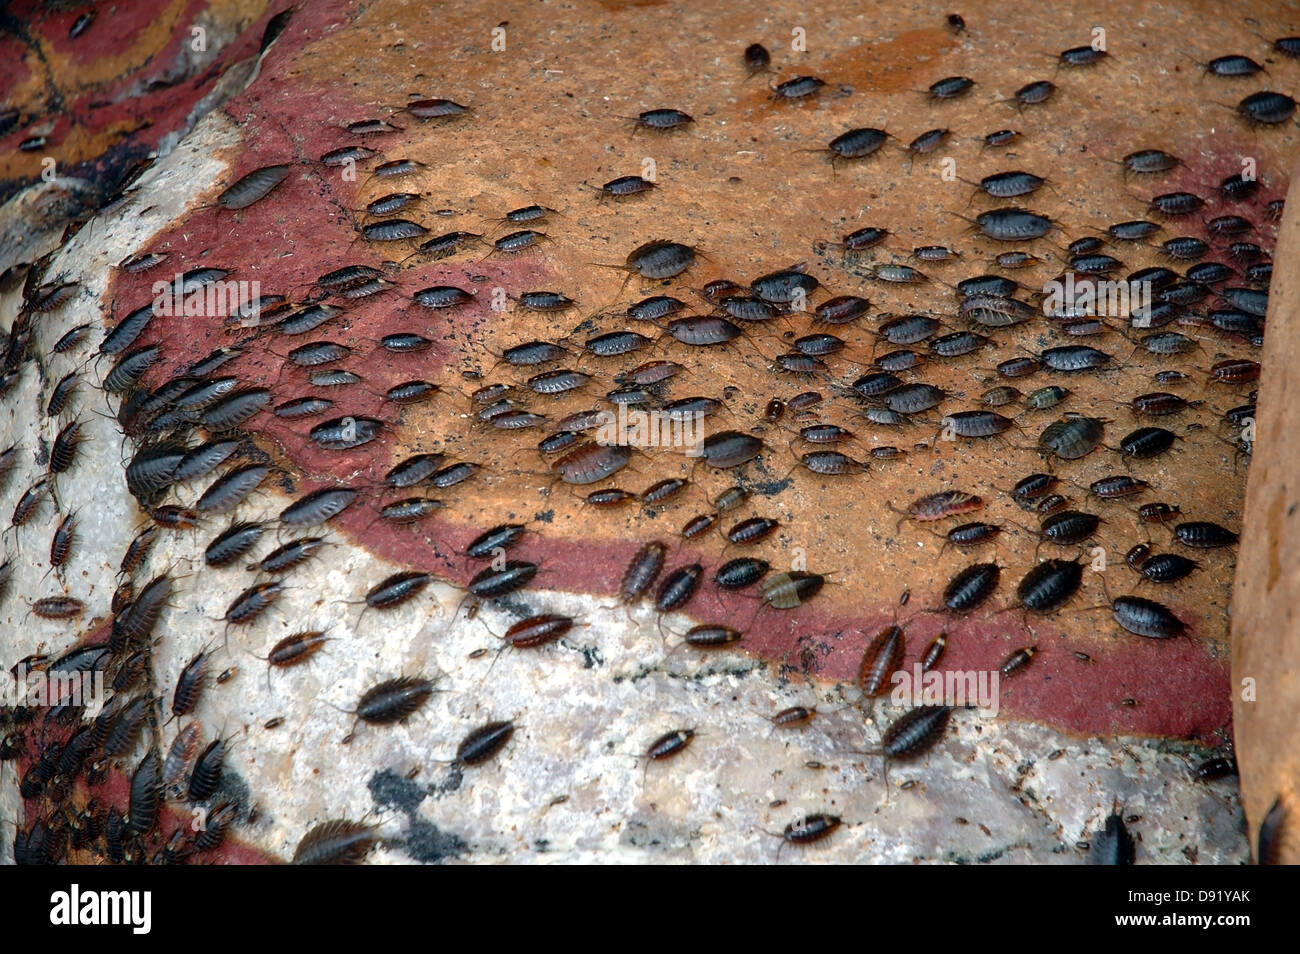 Intertidal isopods moving over rocks at Cape of Good Hope, Table Mountain National Park, South Africa Stock Photo